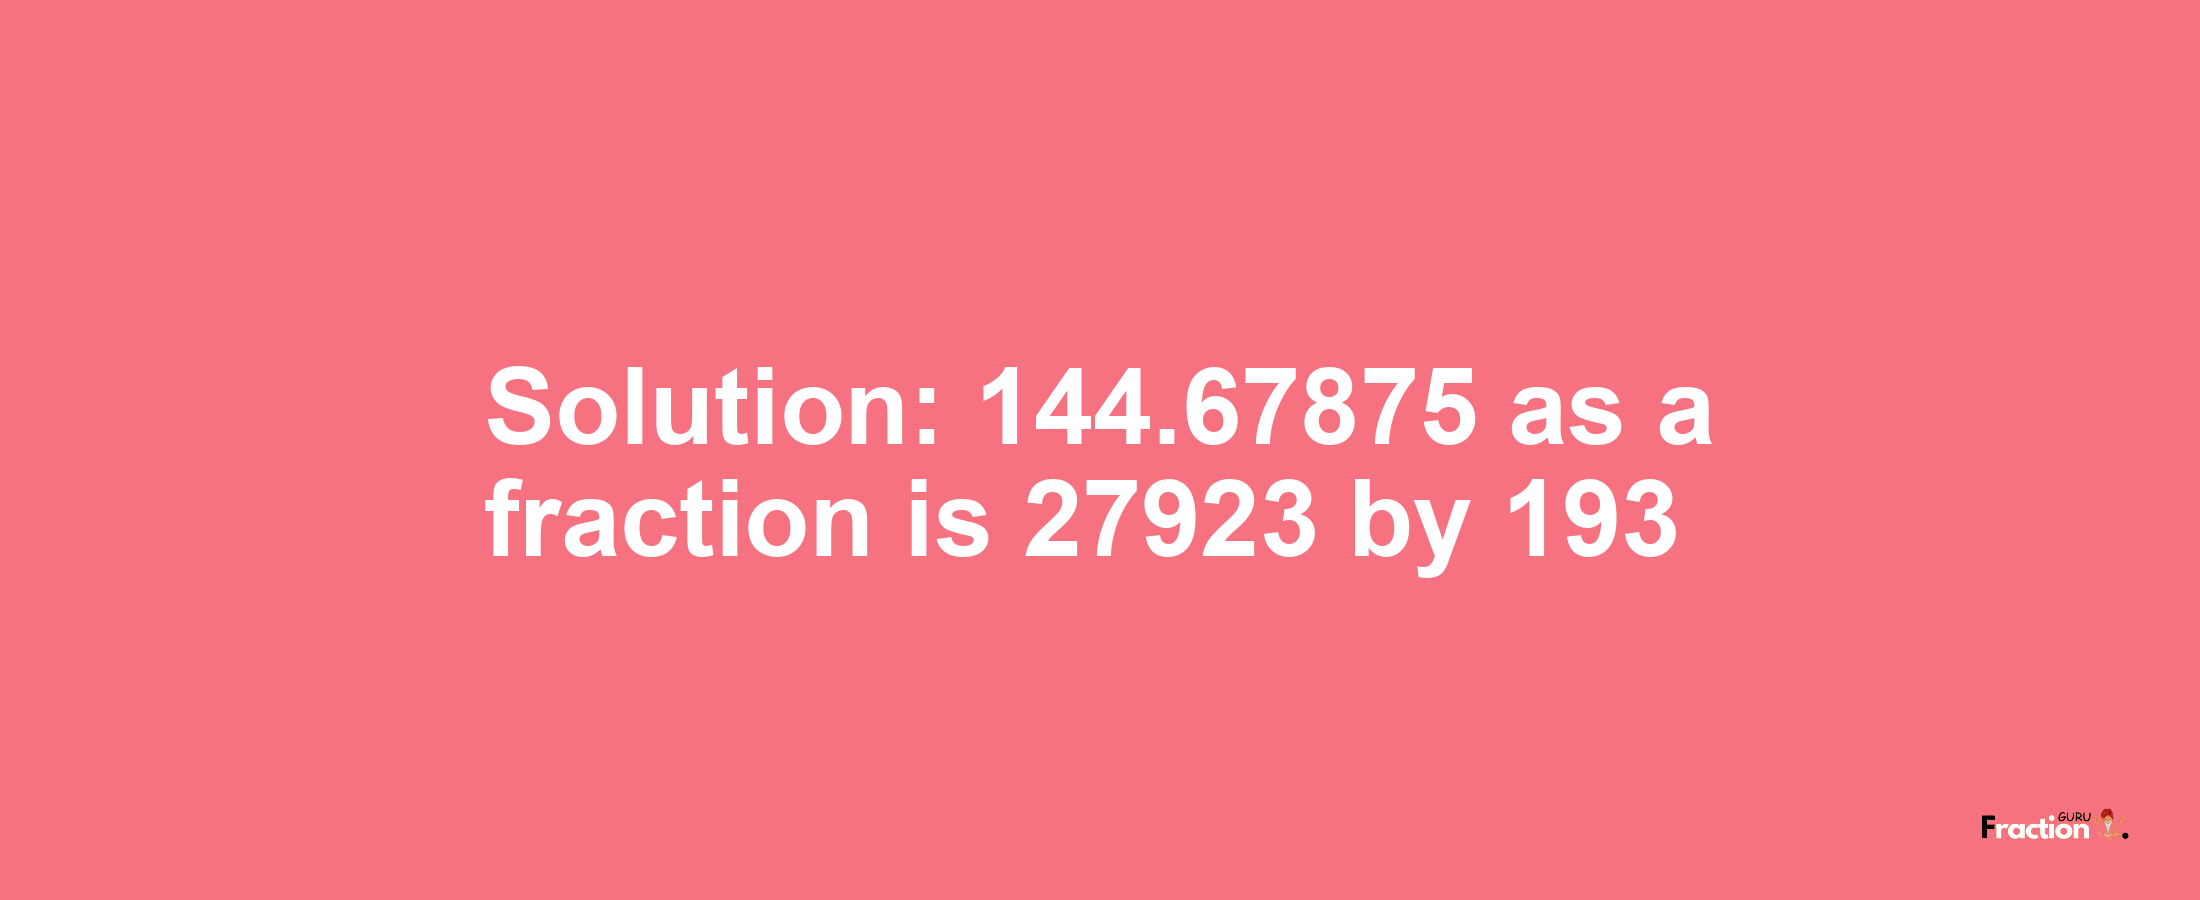 Solution:144.67875 as a fraction is 27923/193